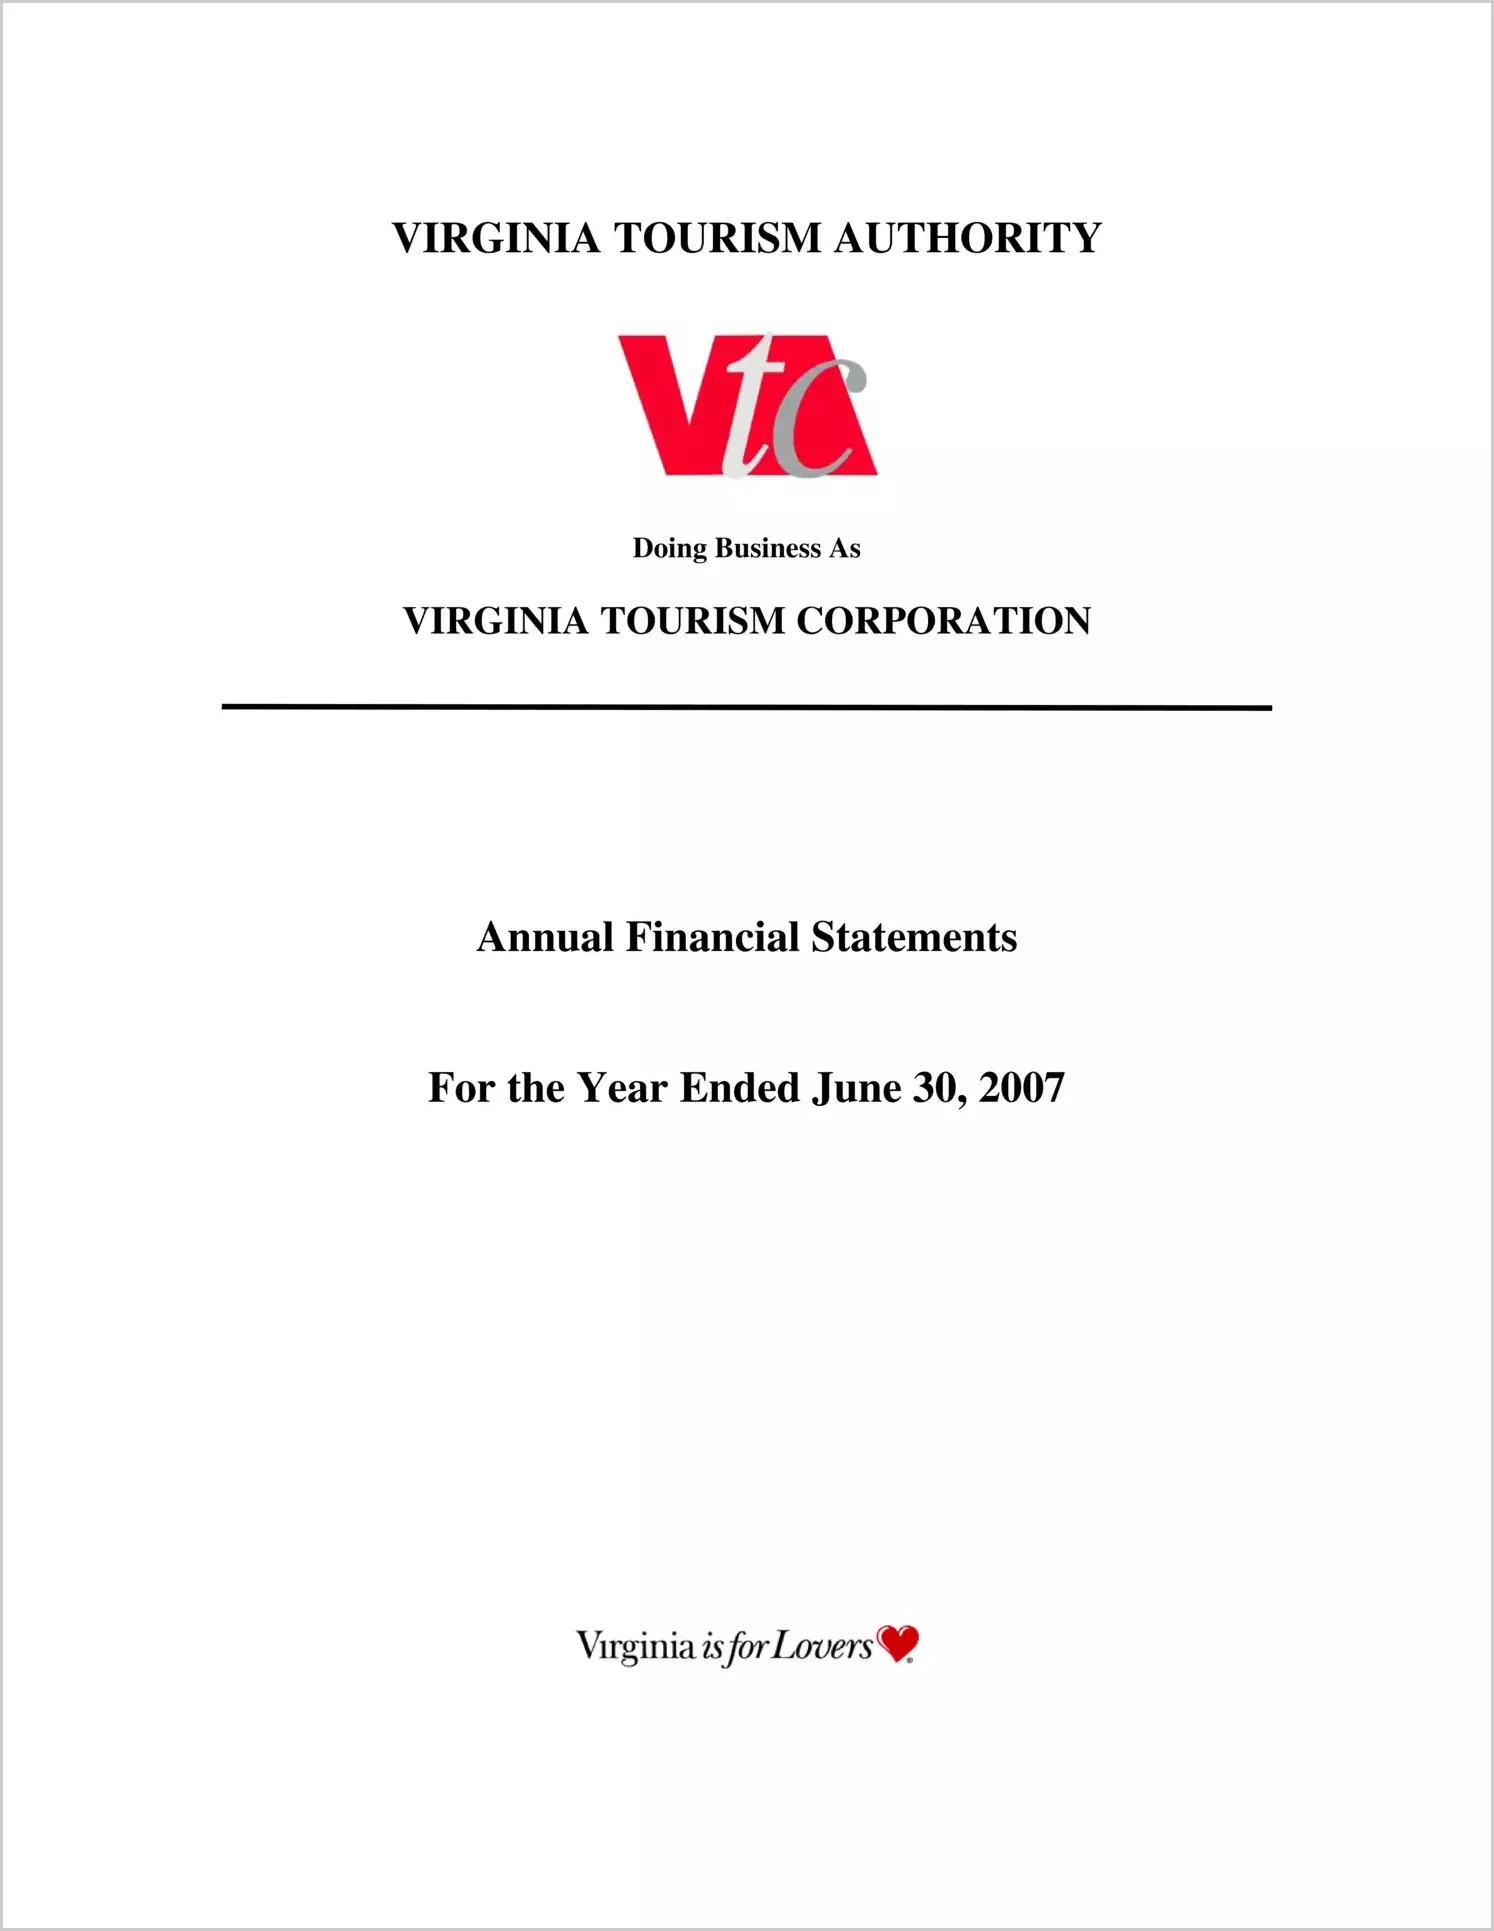 Virginia Tourism Corporation Annual Financial Statements for the year ended June 30, 2007